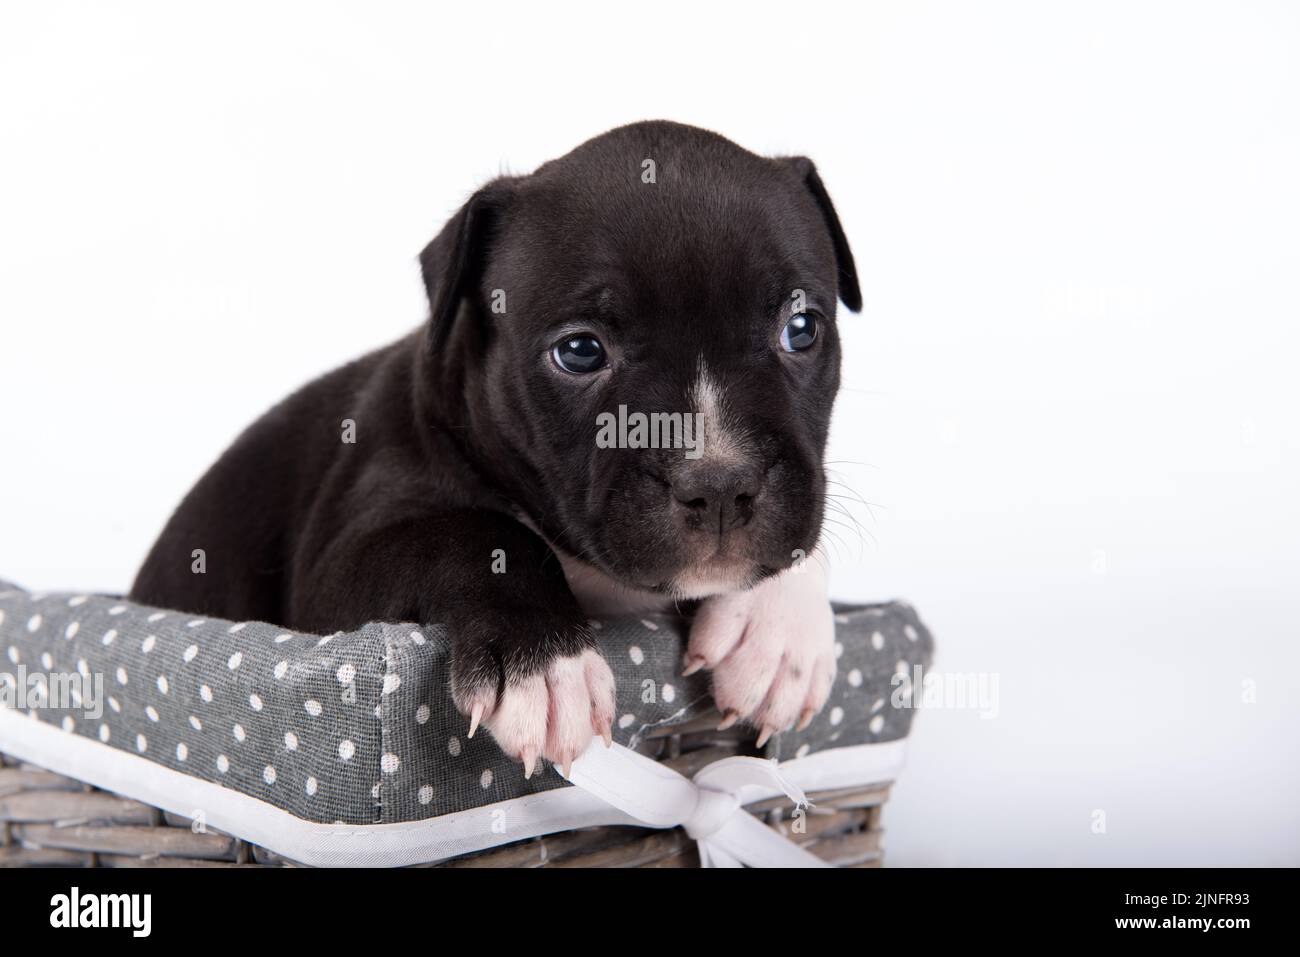 Black and white American Staffordshire Terrier dog or AmStaff puppy on white background Stock Photo